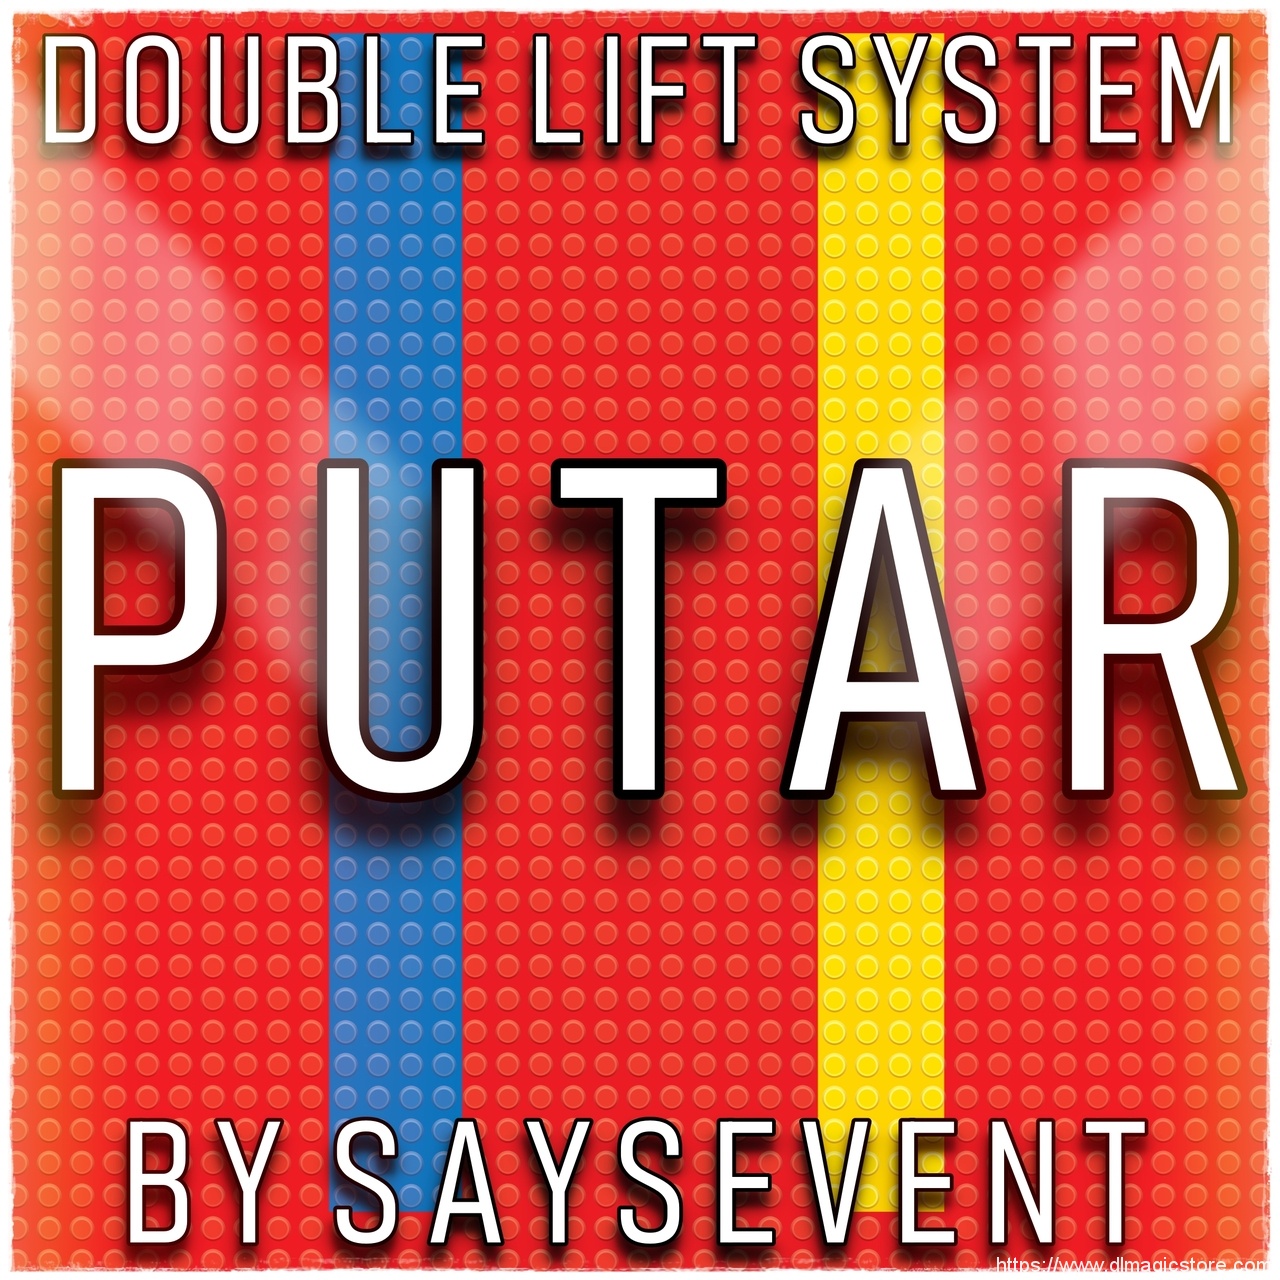 PUTAR 2 by SaysevenT (Instant Download)